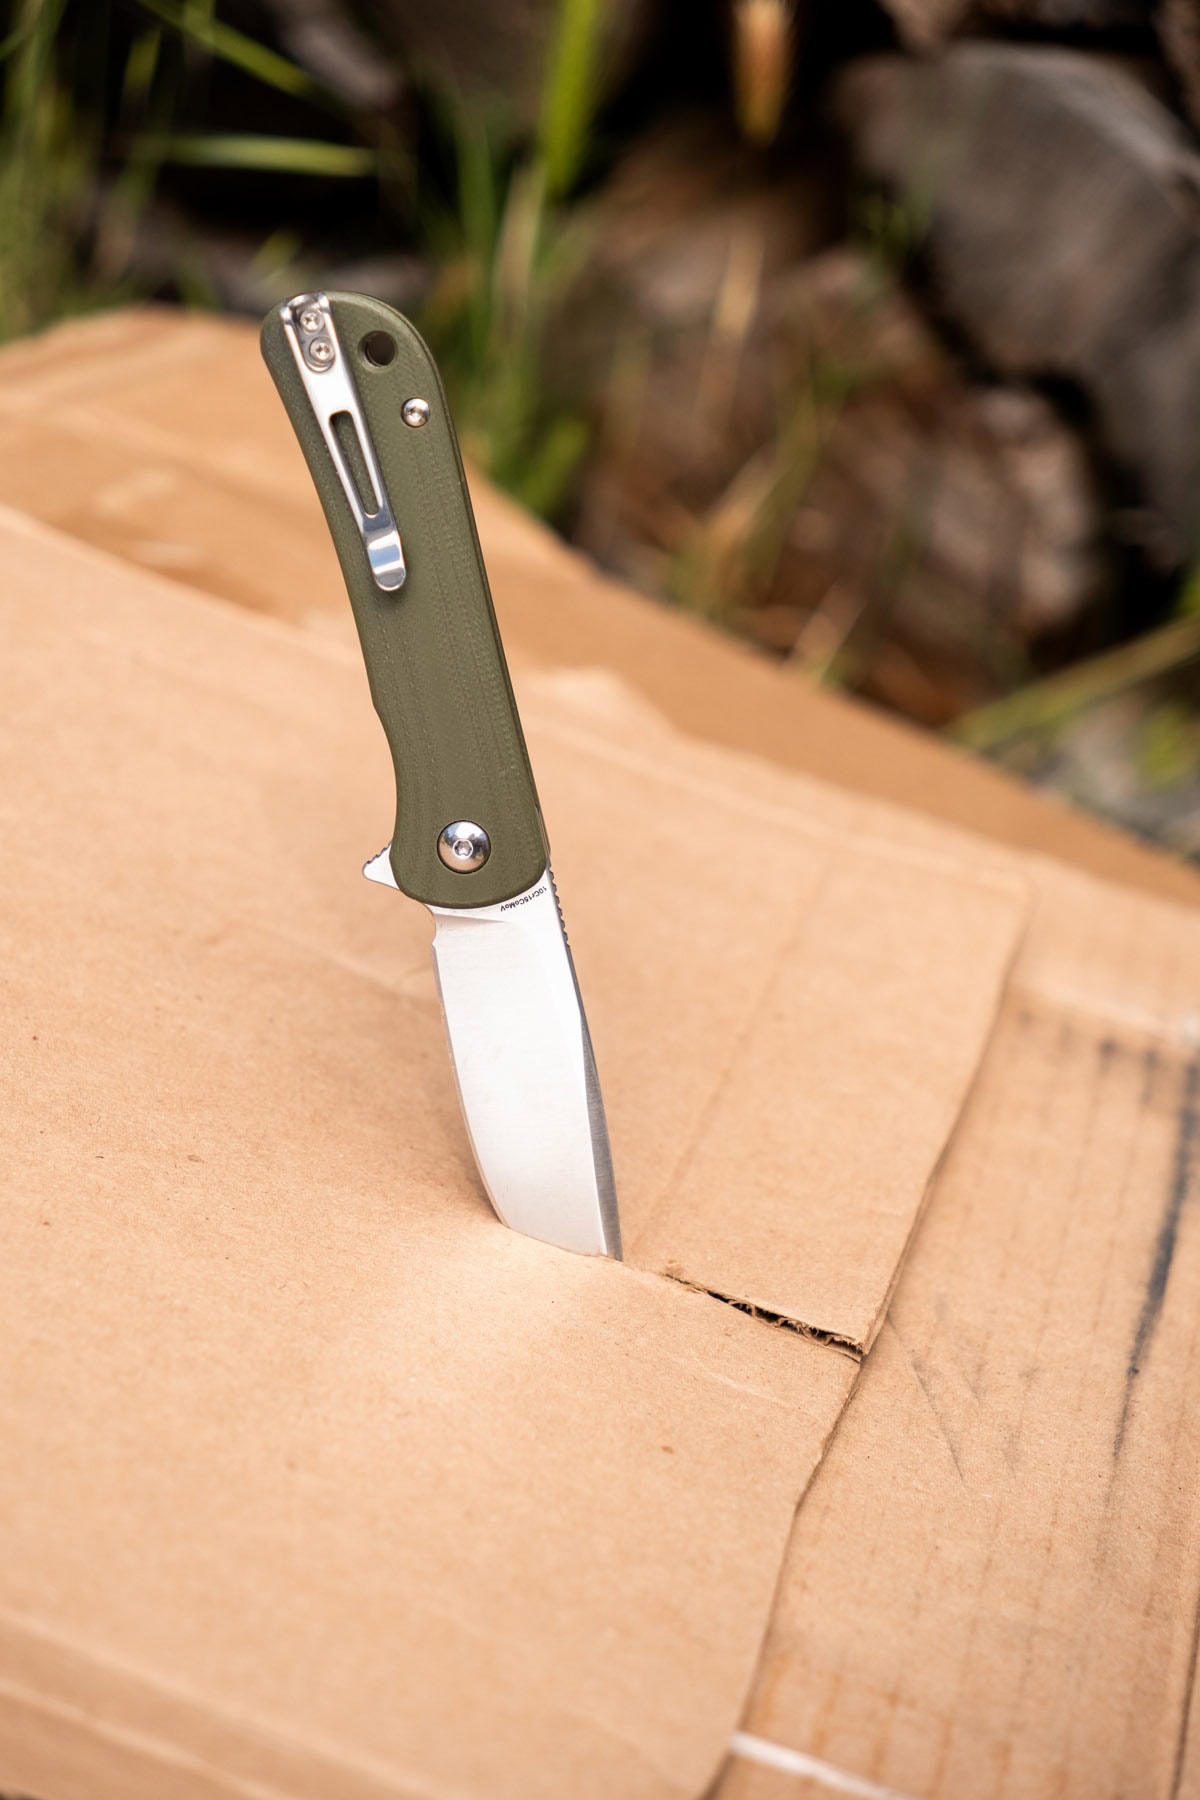 The Fast Eddie is a great option if you need a small knife that excels at cutting cardboard.